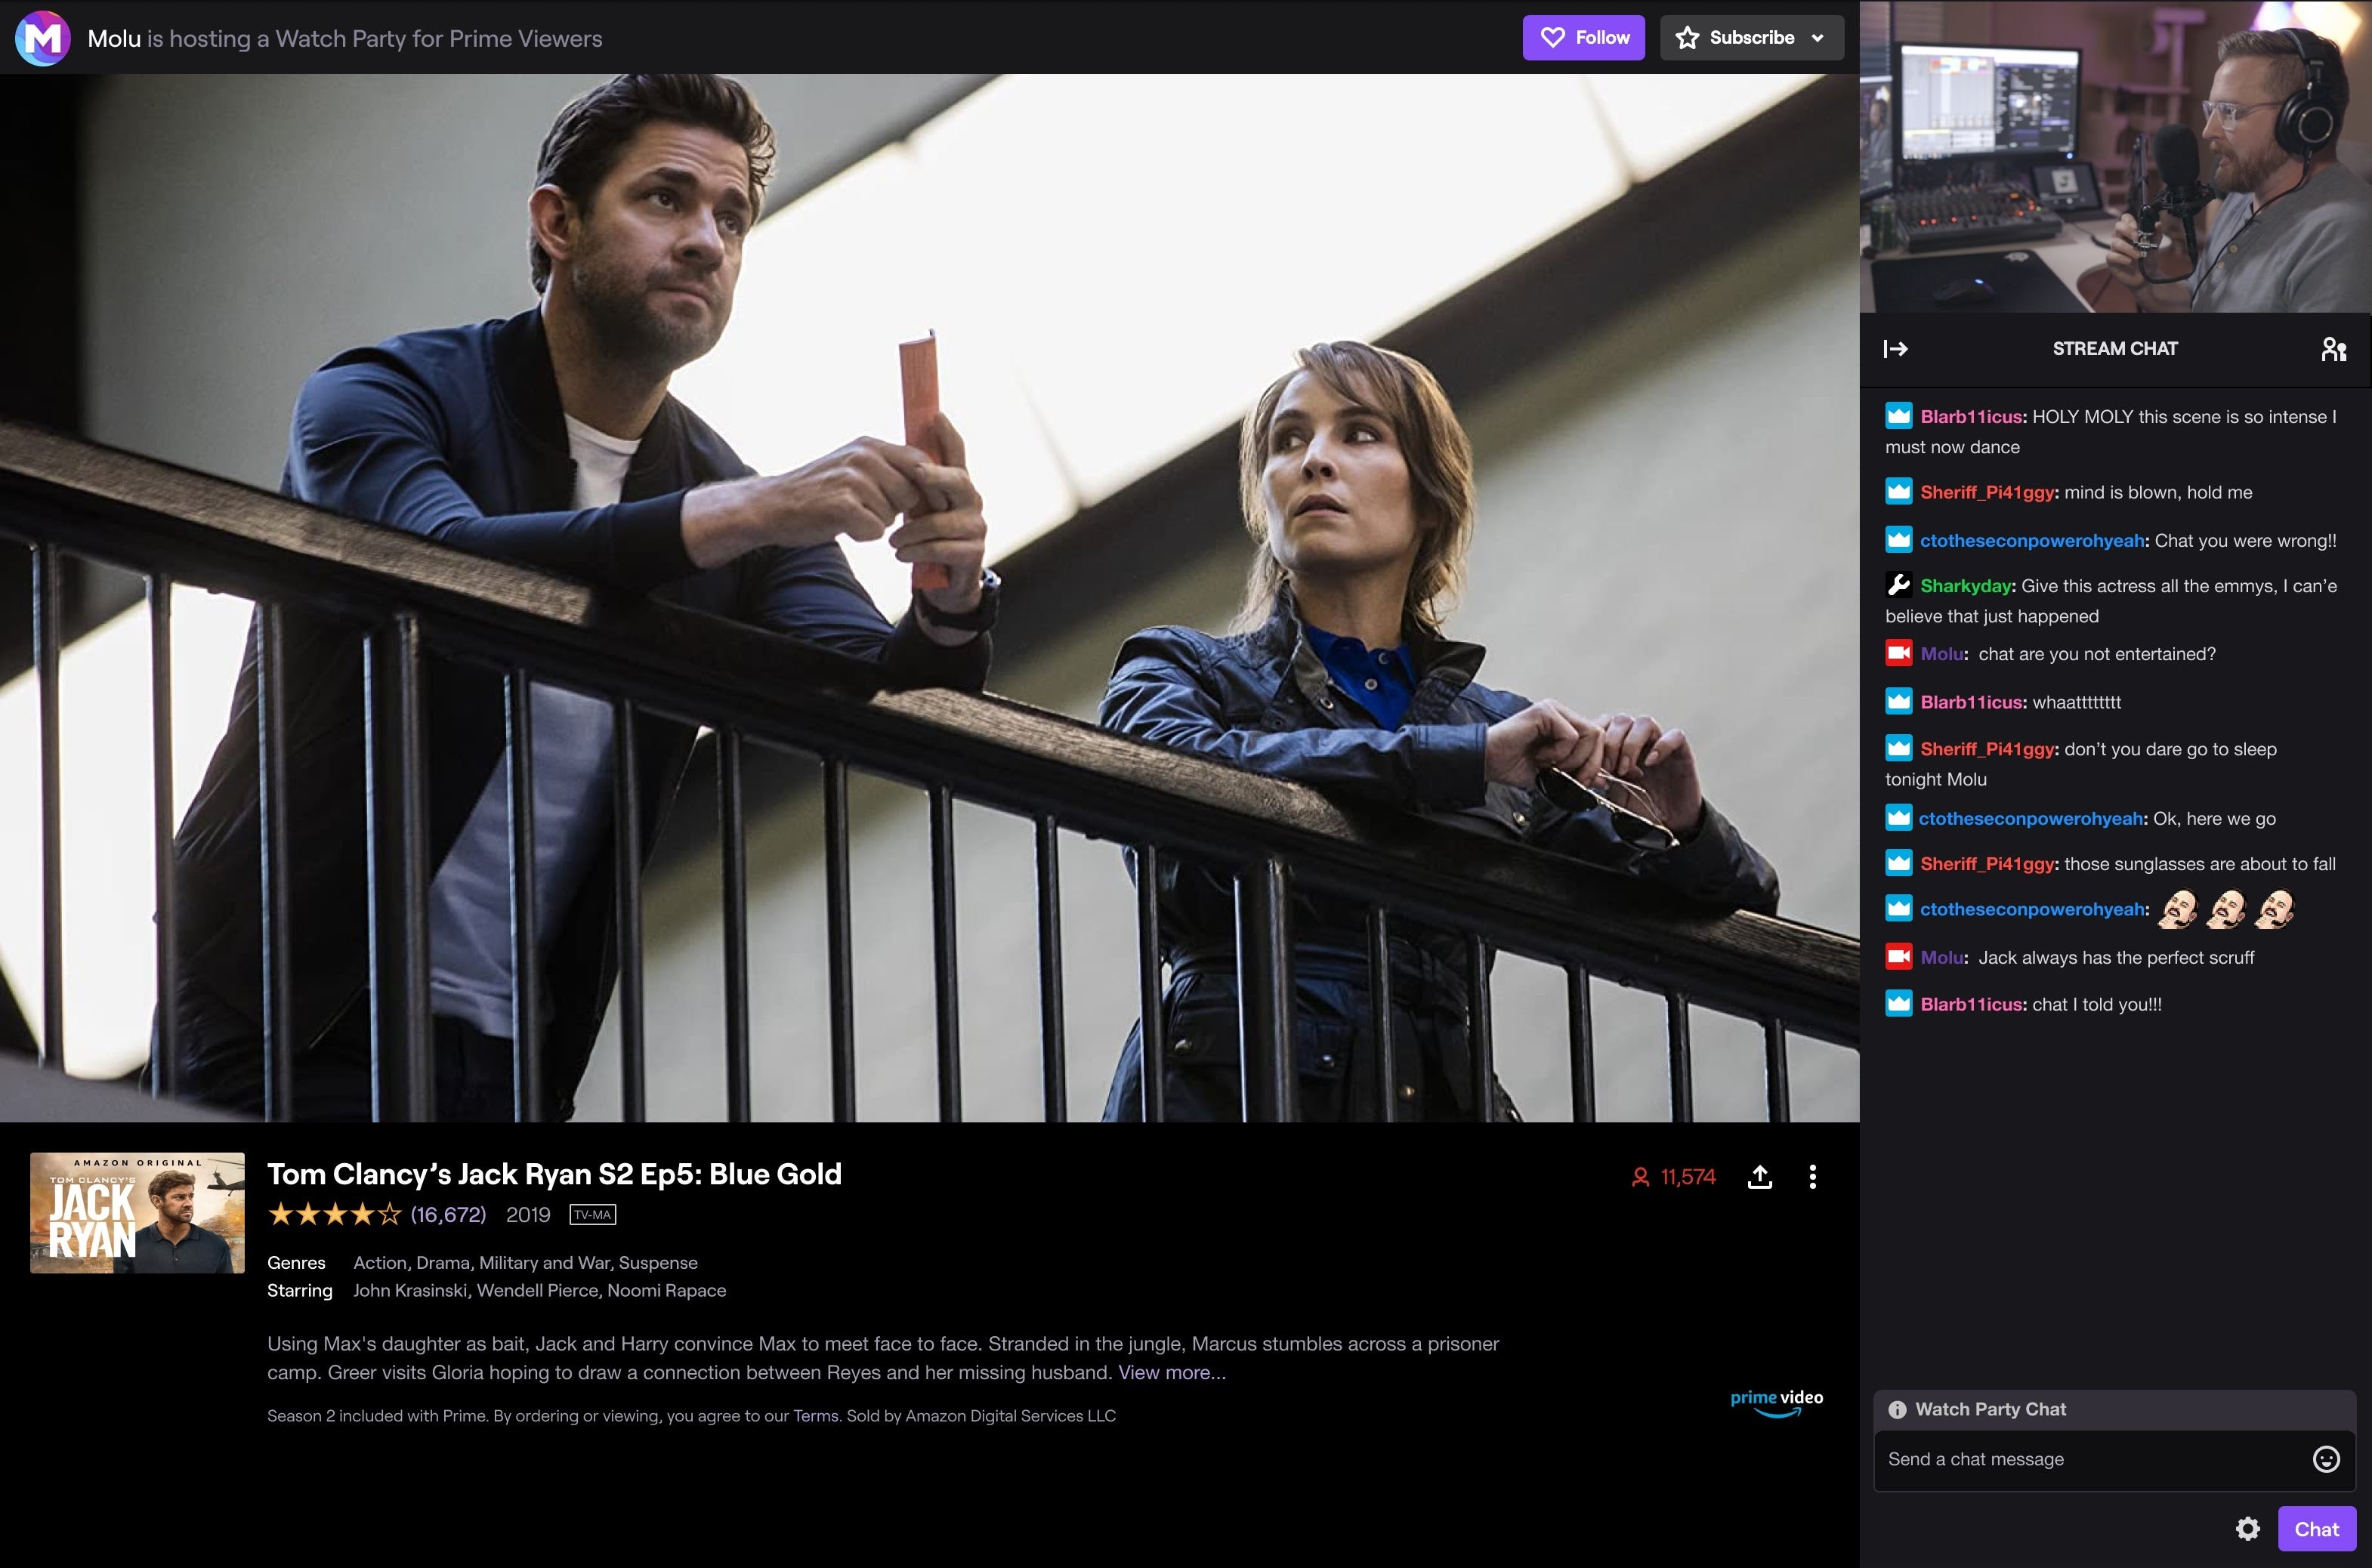 Screenshot showing the Twitch Watch Parties experience - Twitch Watch Parties lets streamers and their audiences watch Amazon Prime movies together